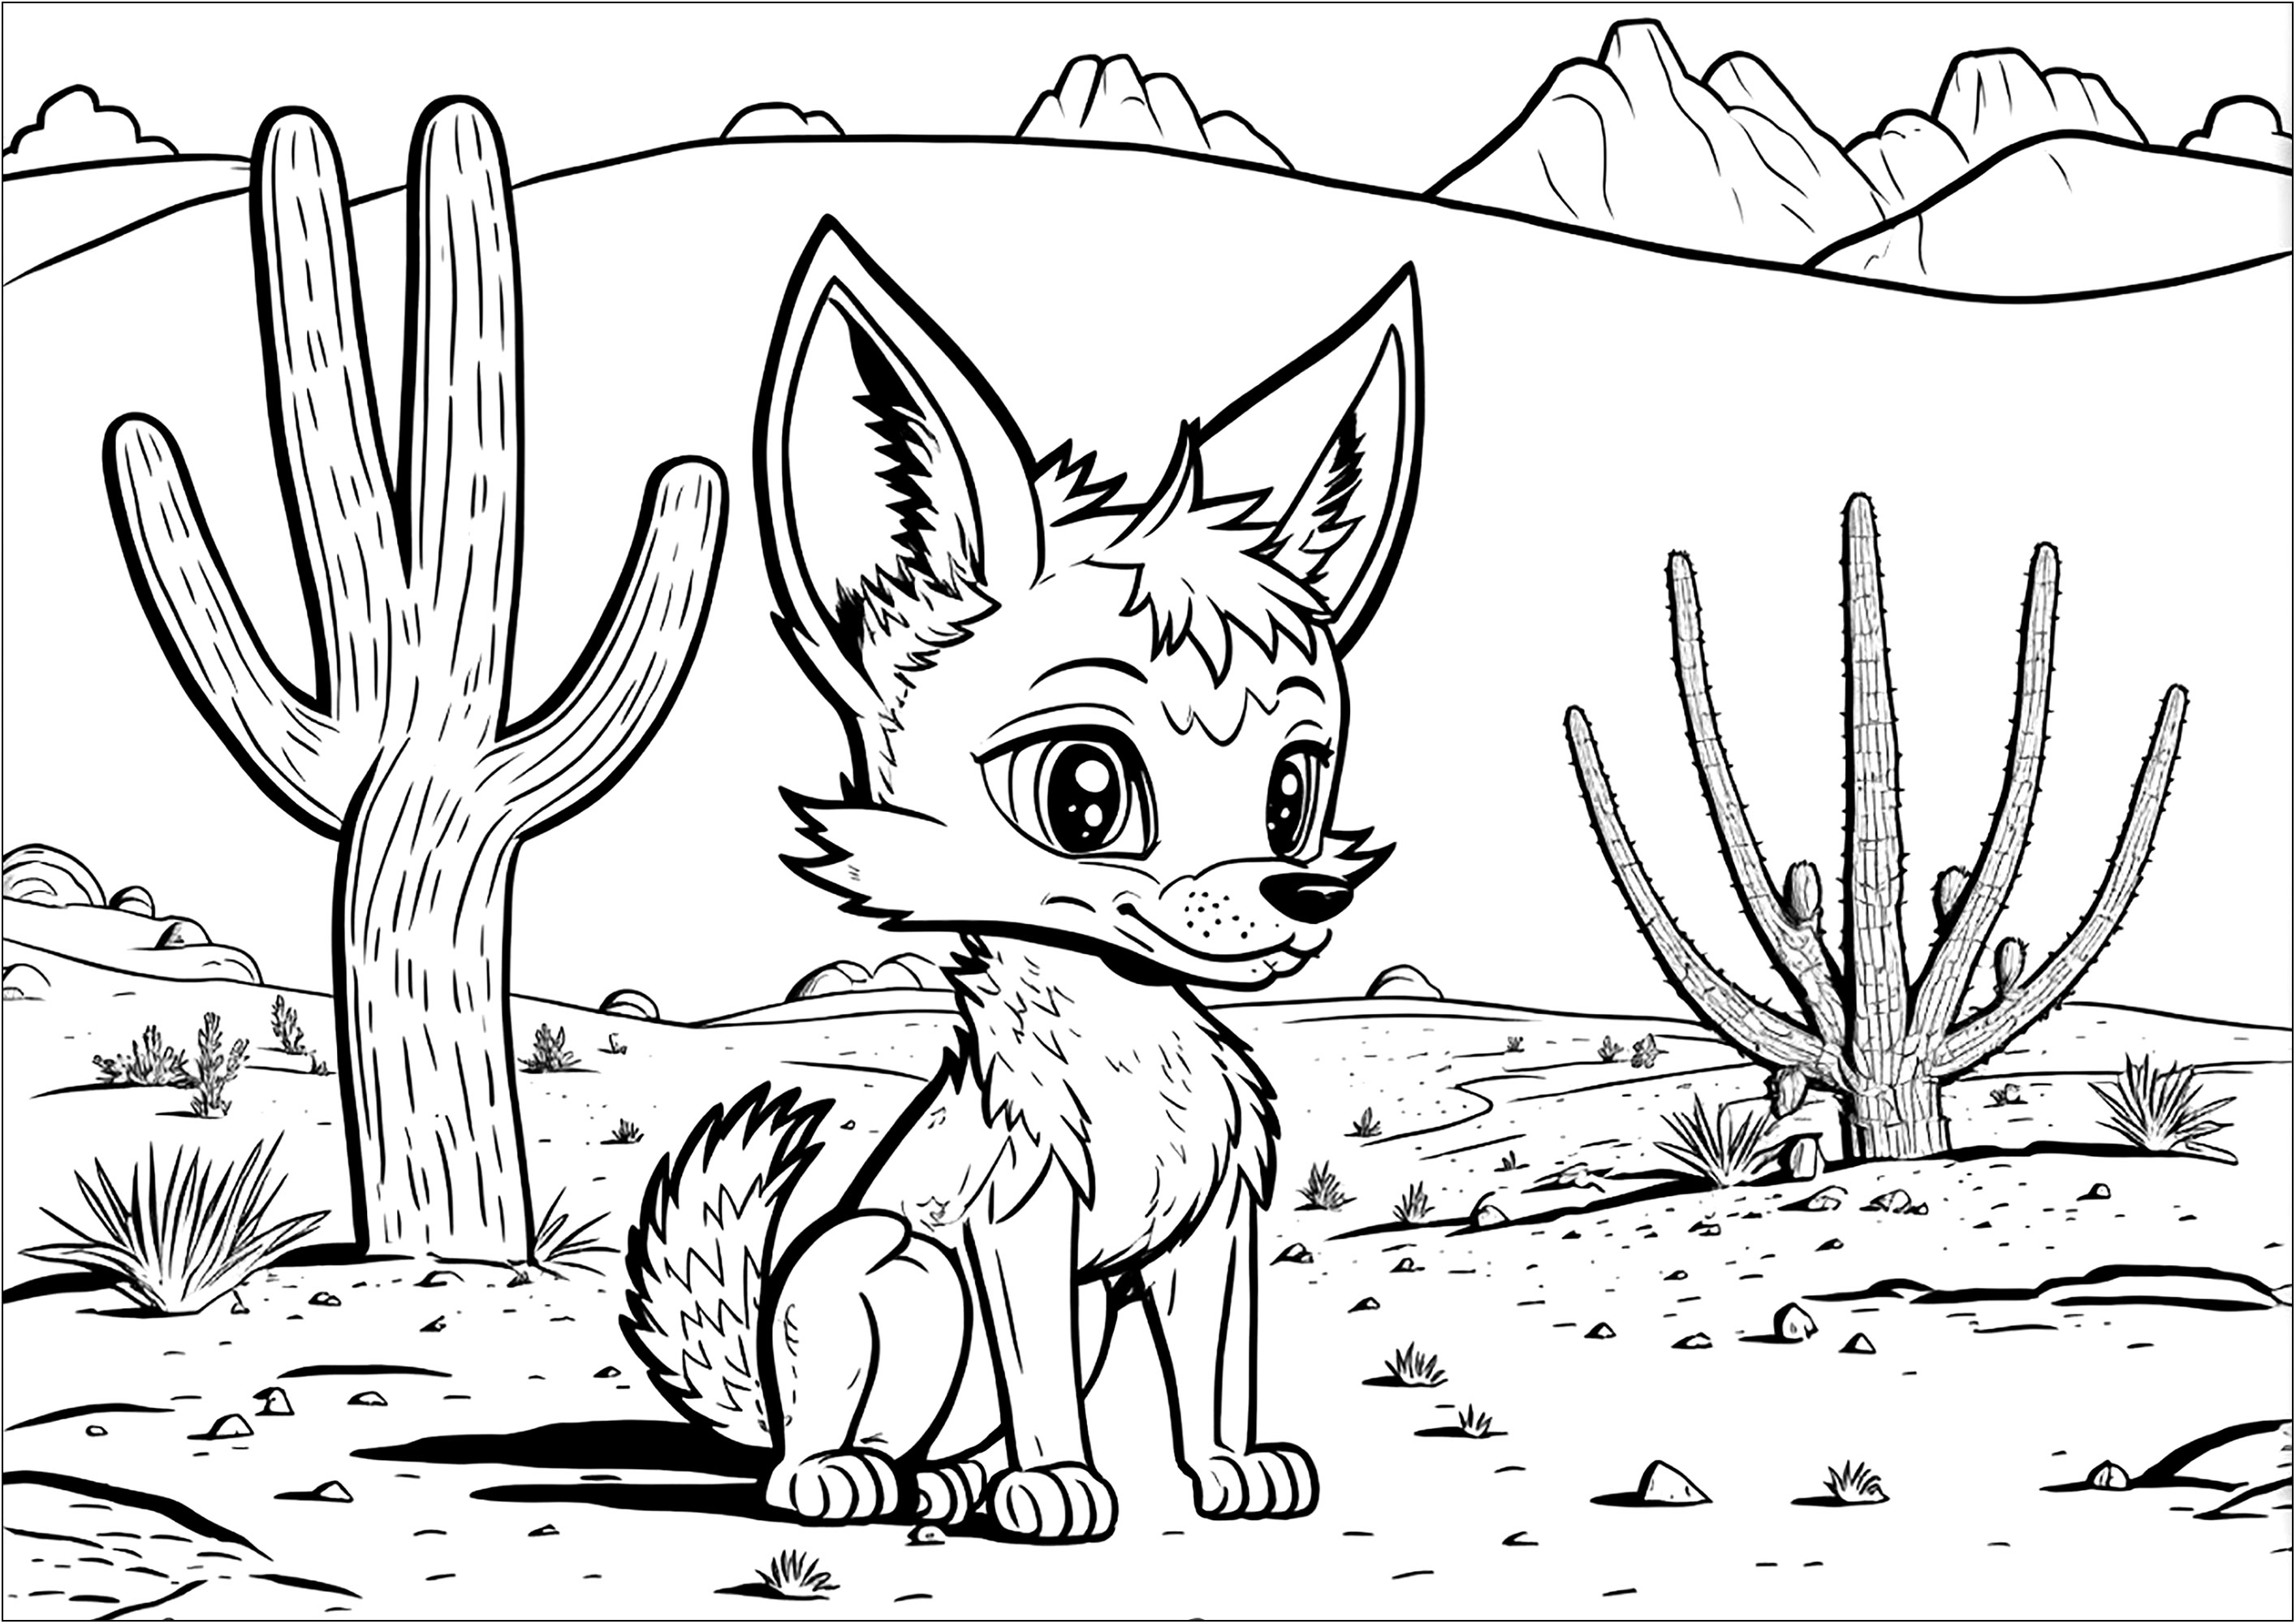 Let your creativity flow by coloring this fox and the desert landscape in which it is located. Cacti, mountains and rocks stand behind this young fox, waiting to be colored.